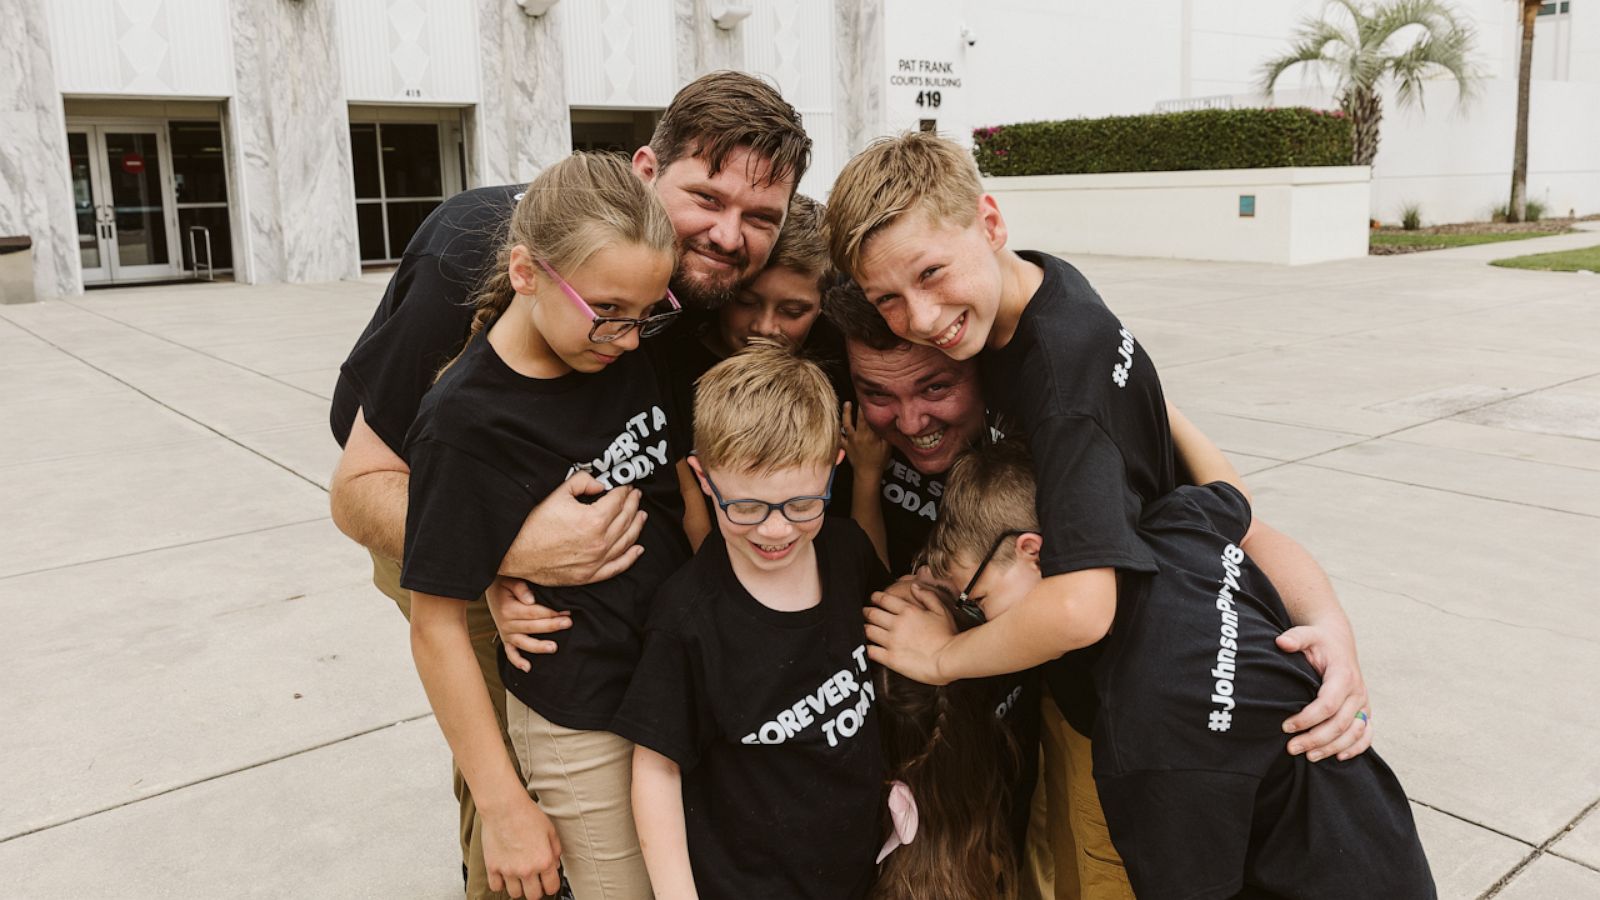 VIDEO: Dads celebrate 1st Father's Day after adopting 6 siblings